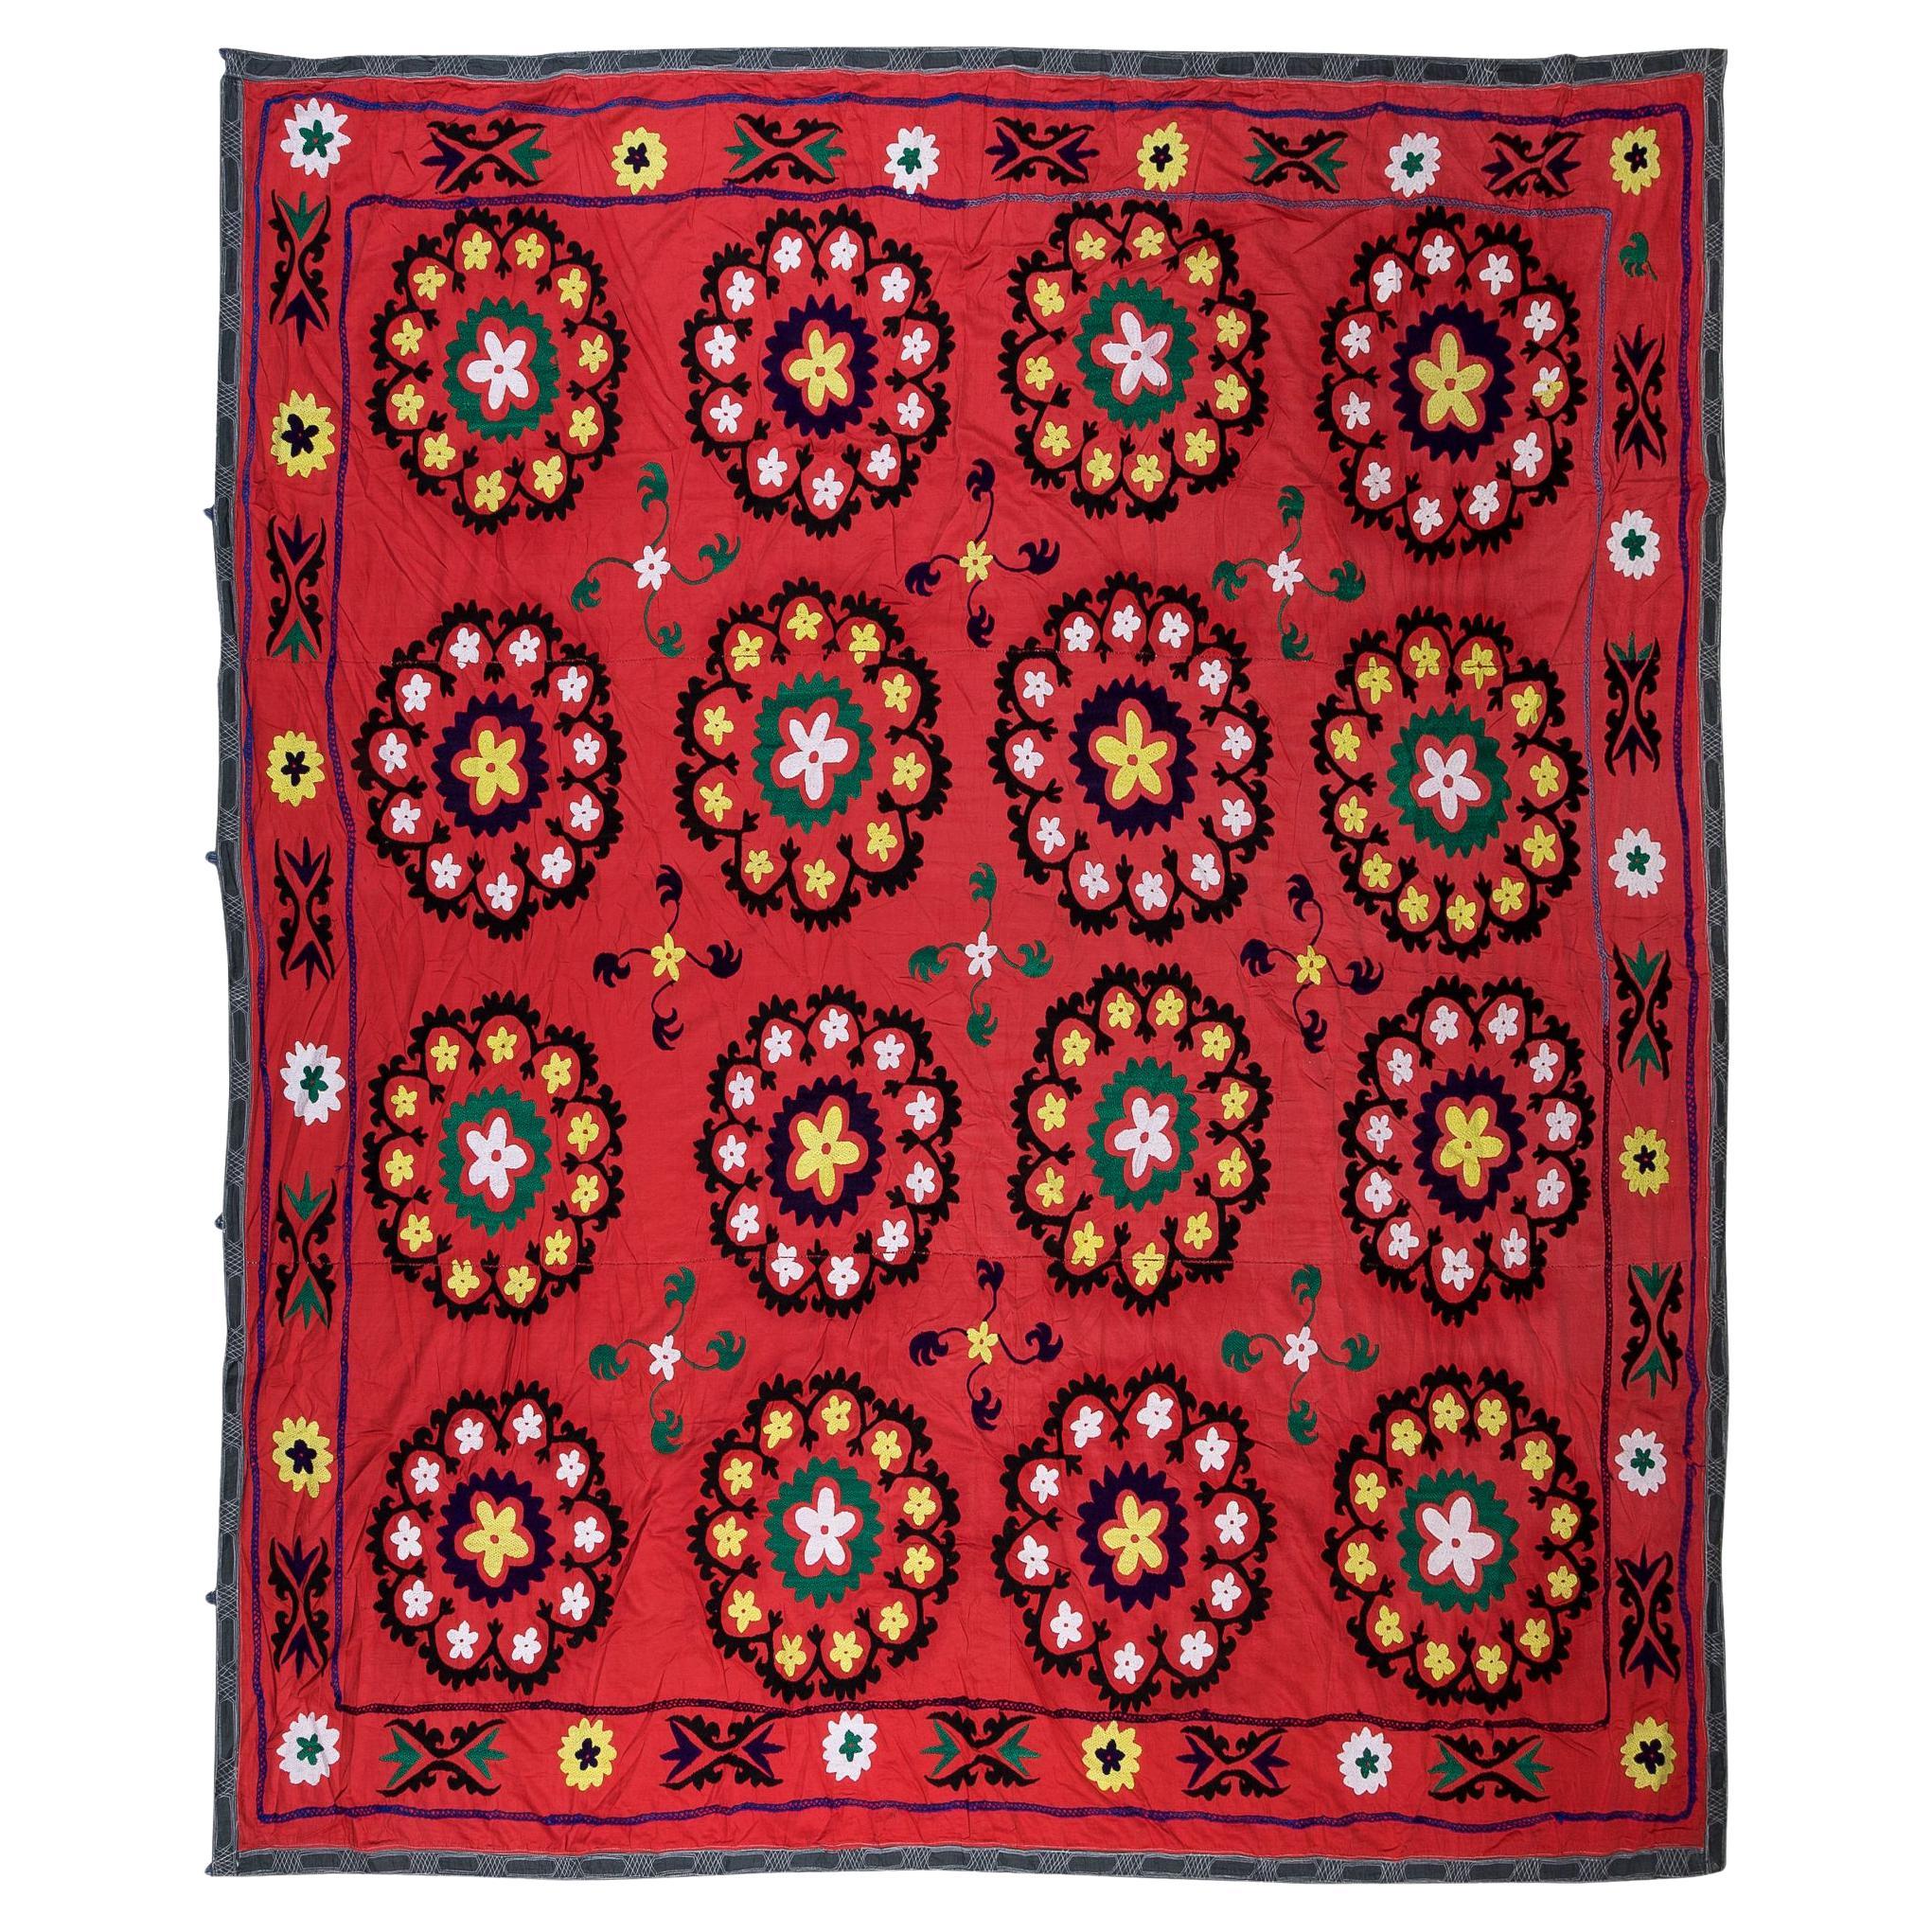 7.9x7.9 Ft Vintage Silk Embroidery Bed Cover, Red Asian Suzani Tablecloth For Sale